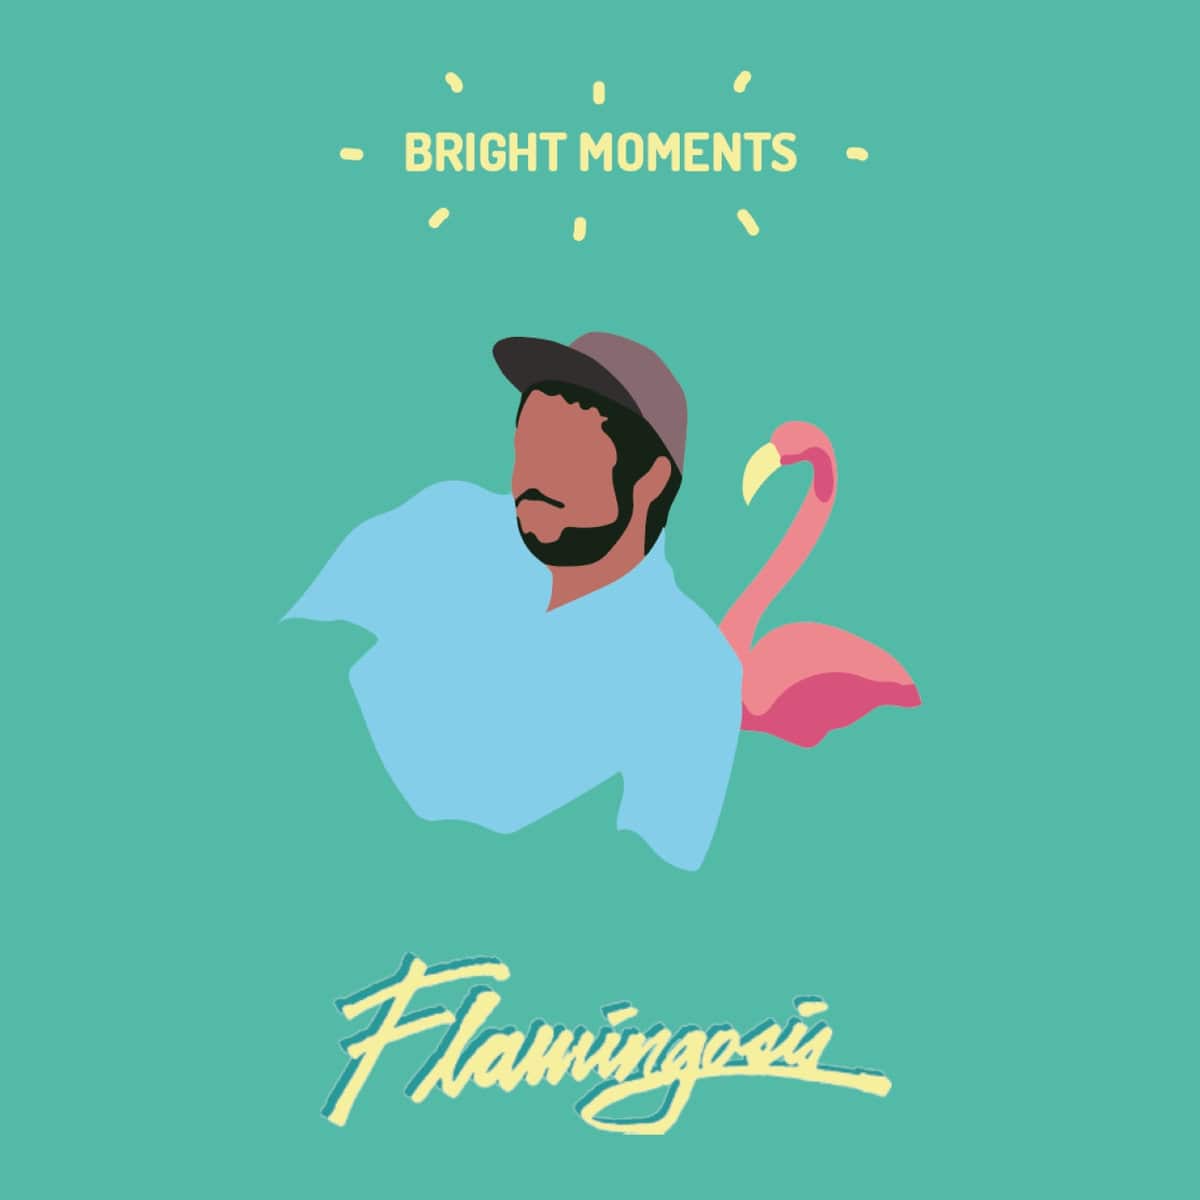 Flamingosis - "Bright Moments" (Release)